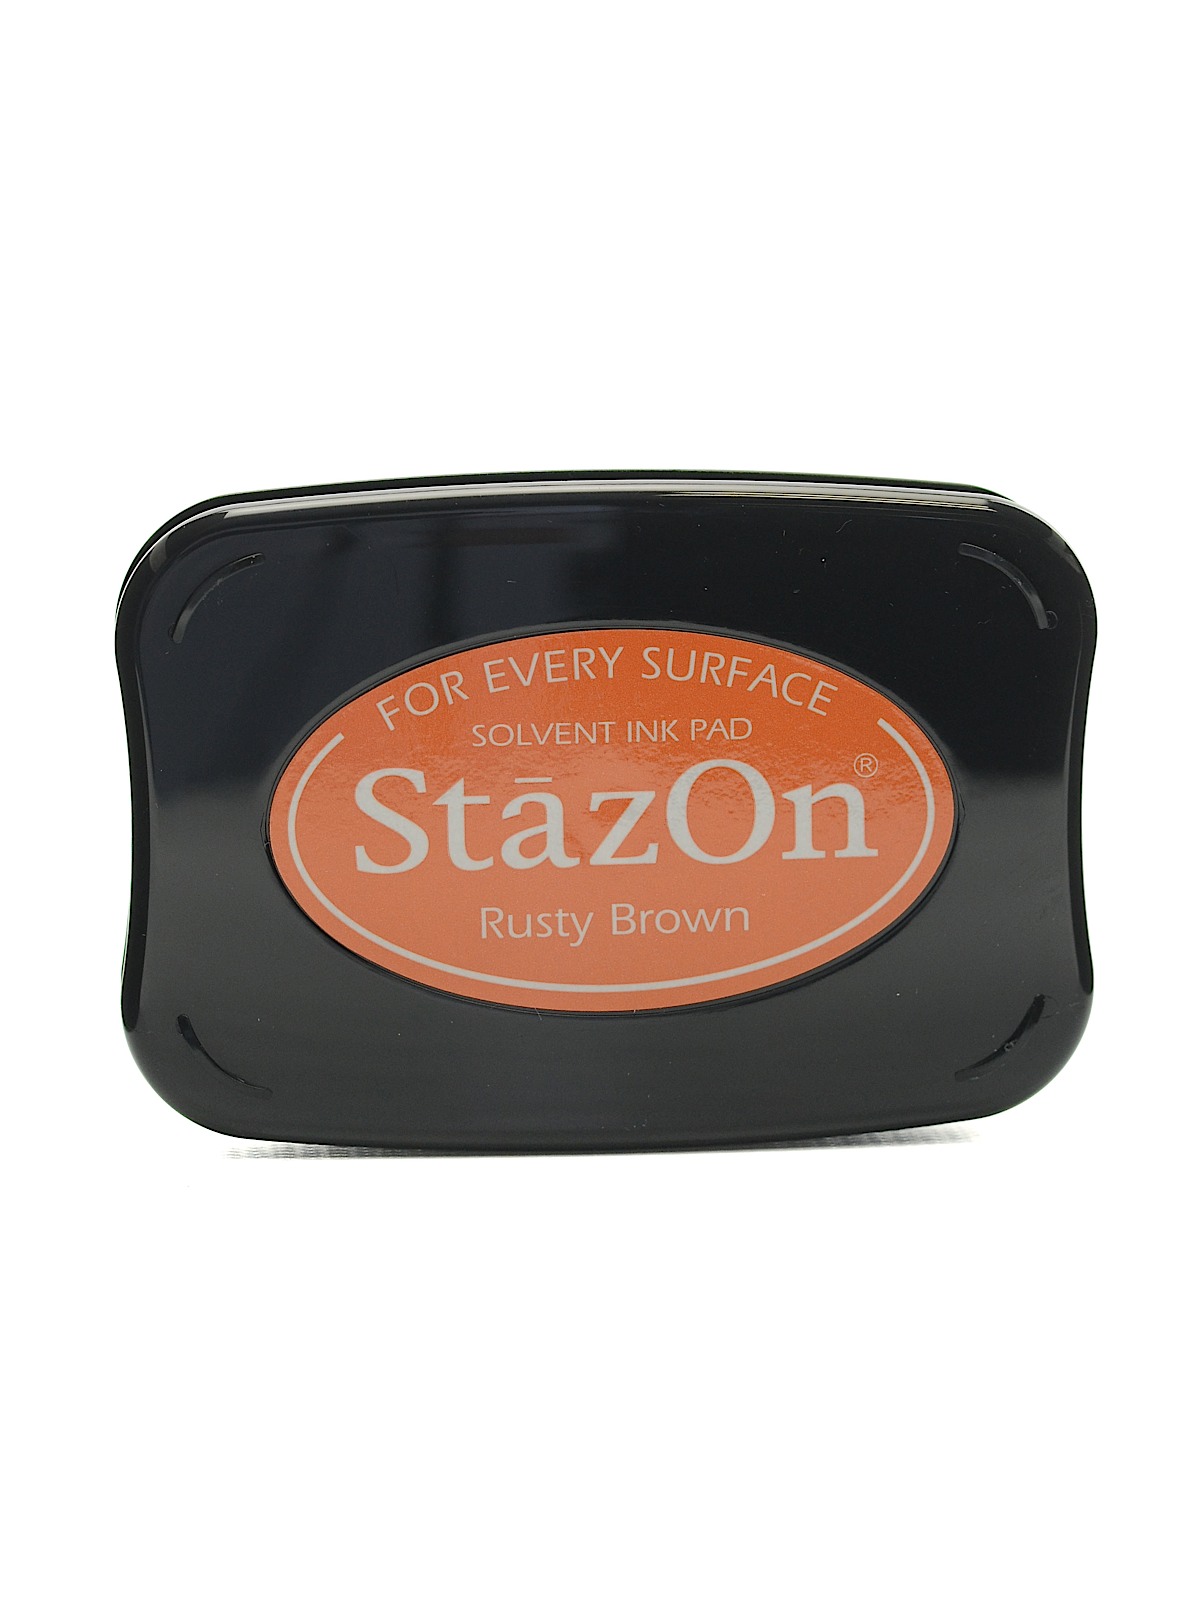 Stazon Solvent Ink Rusty Brown 3.75 In. X 2.625 In. Full-size Pad